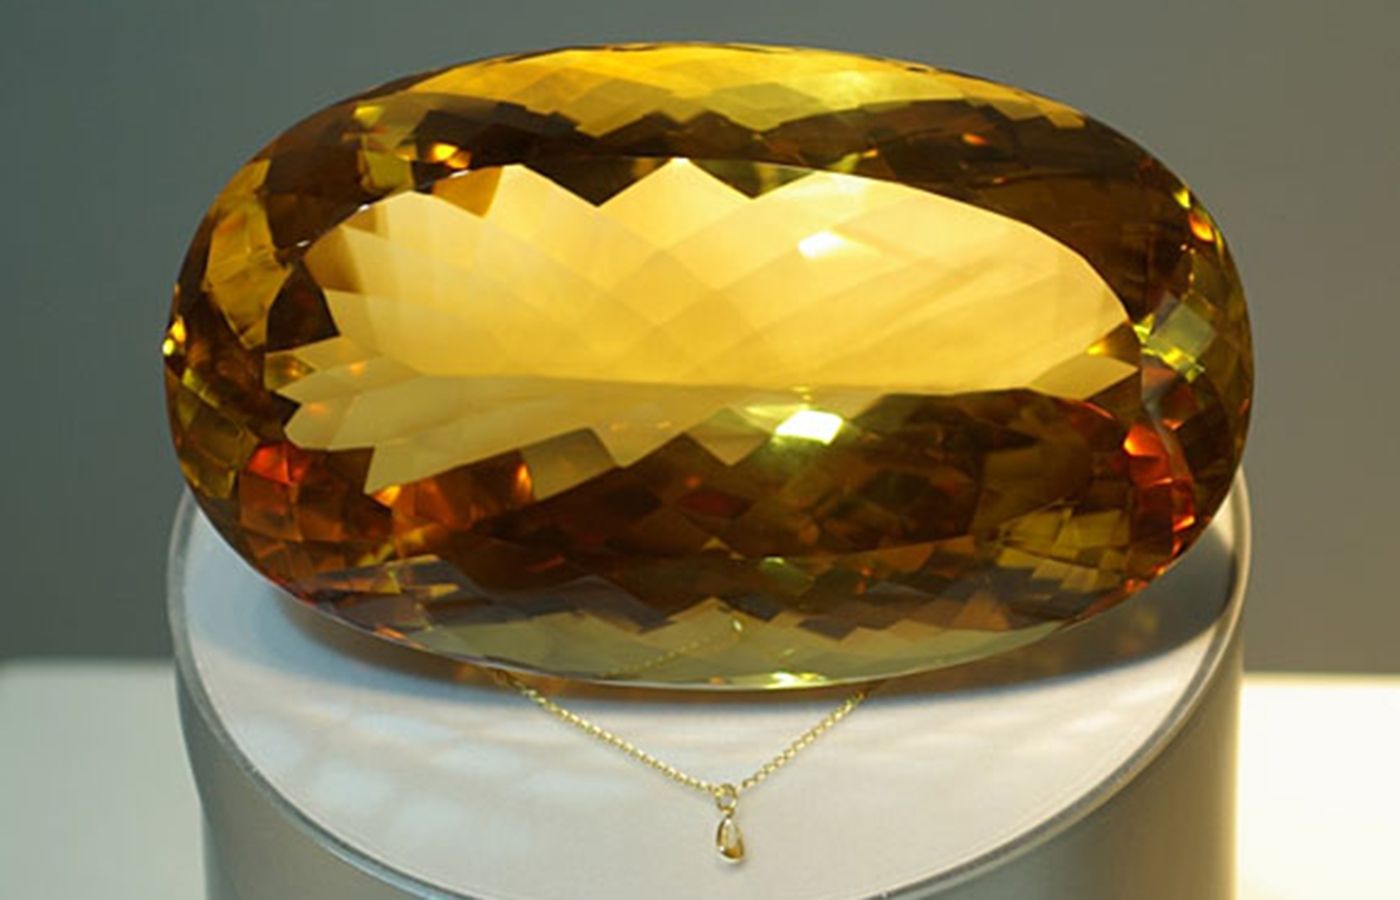  the Malaga gem, the largest citrine ever discovered